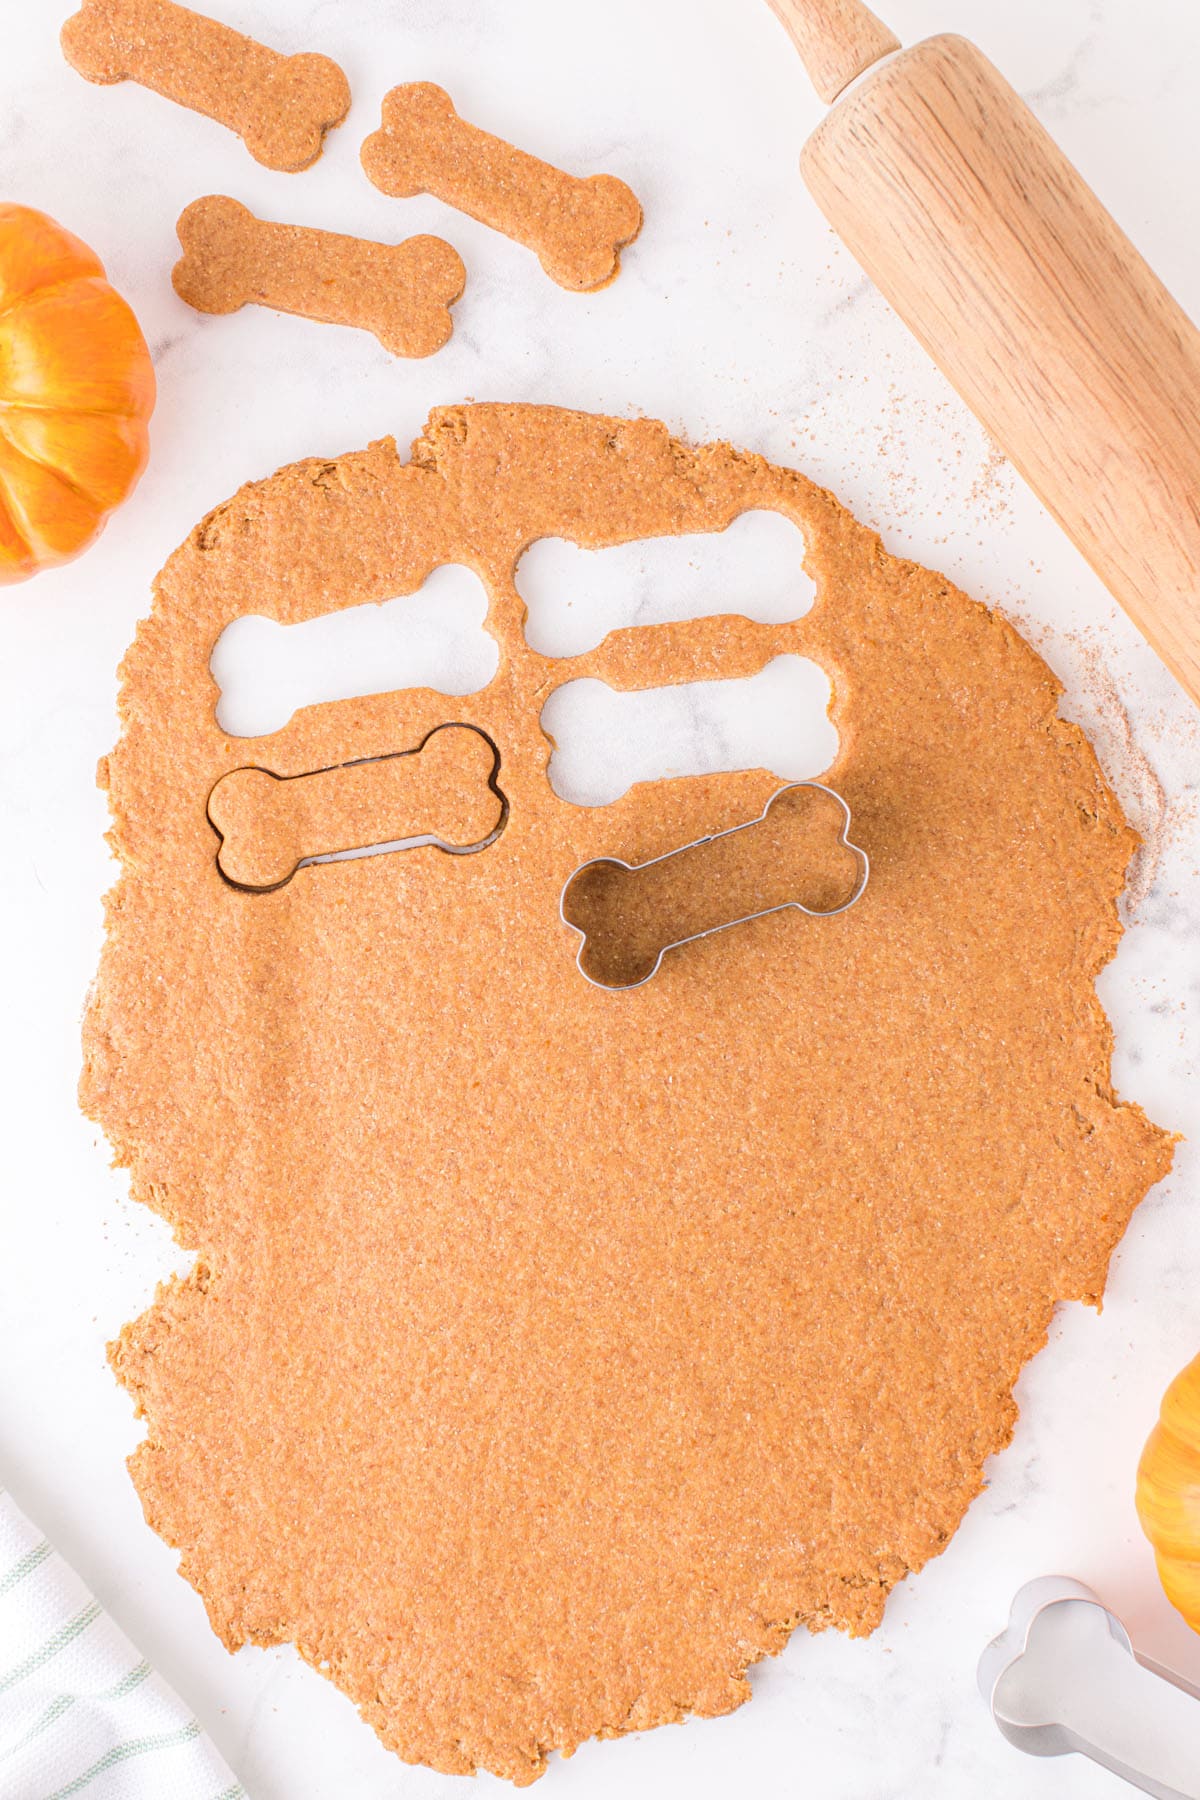 Use cookie cutter to form bone-shaped treats and spread on sheet pan